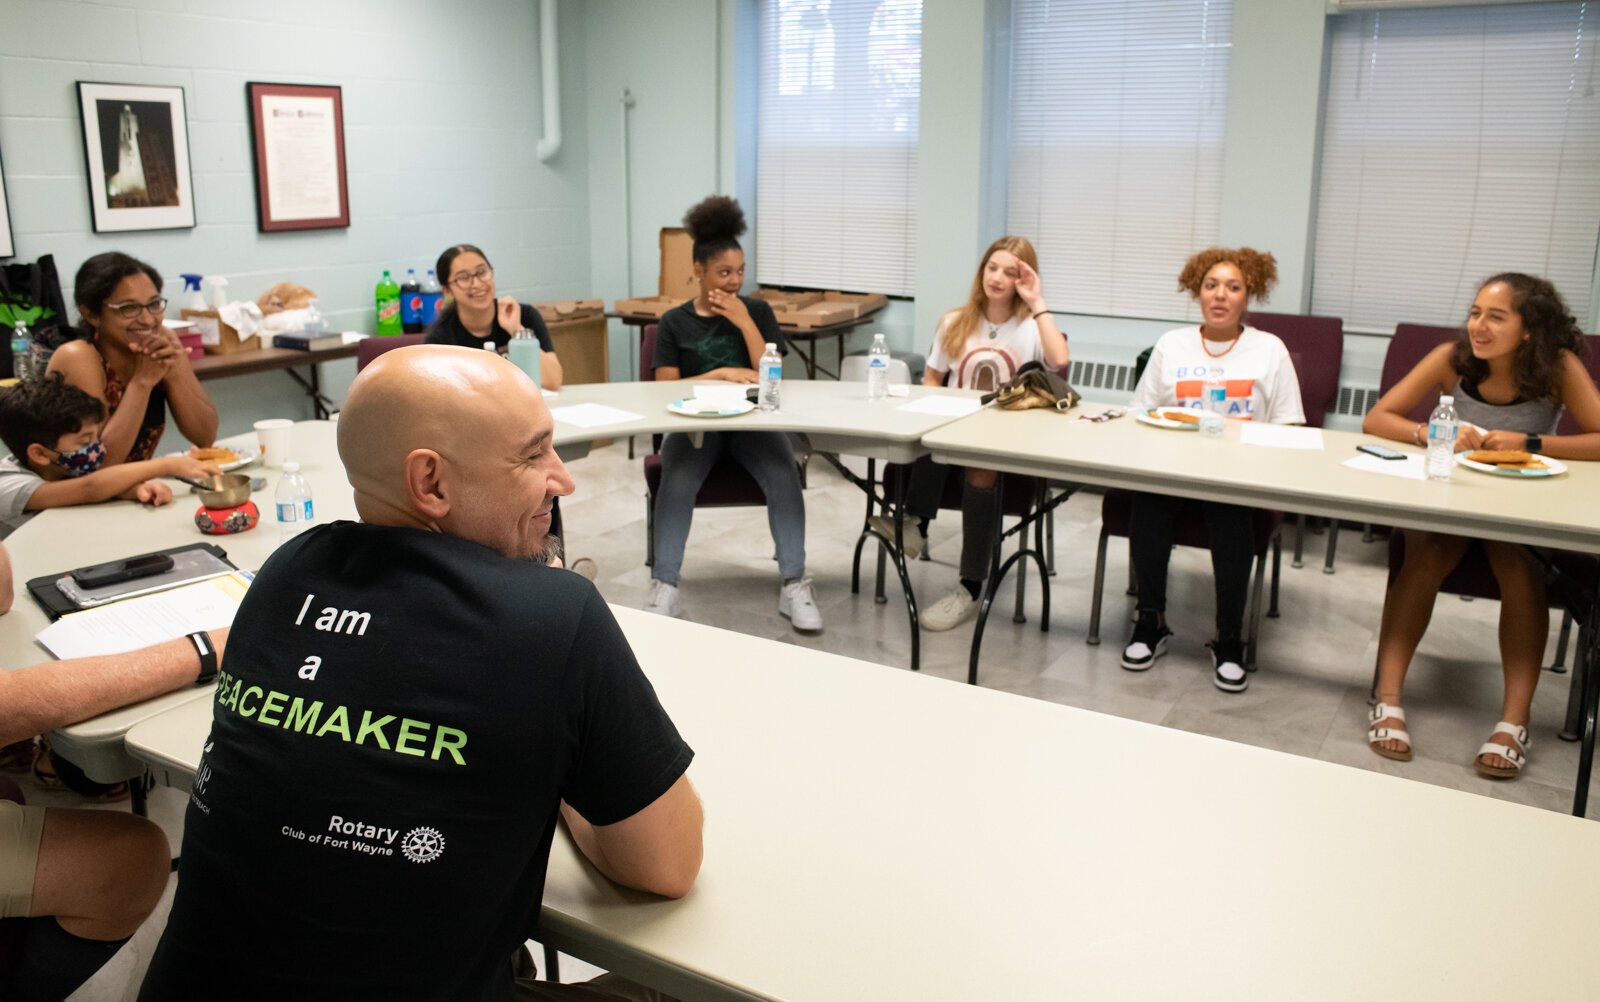 Peacemaker Academy director Angelo Mante leads the meeting at First Wayne St. United Methodist Church on August 22.